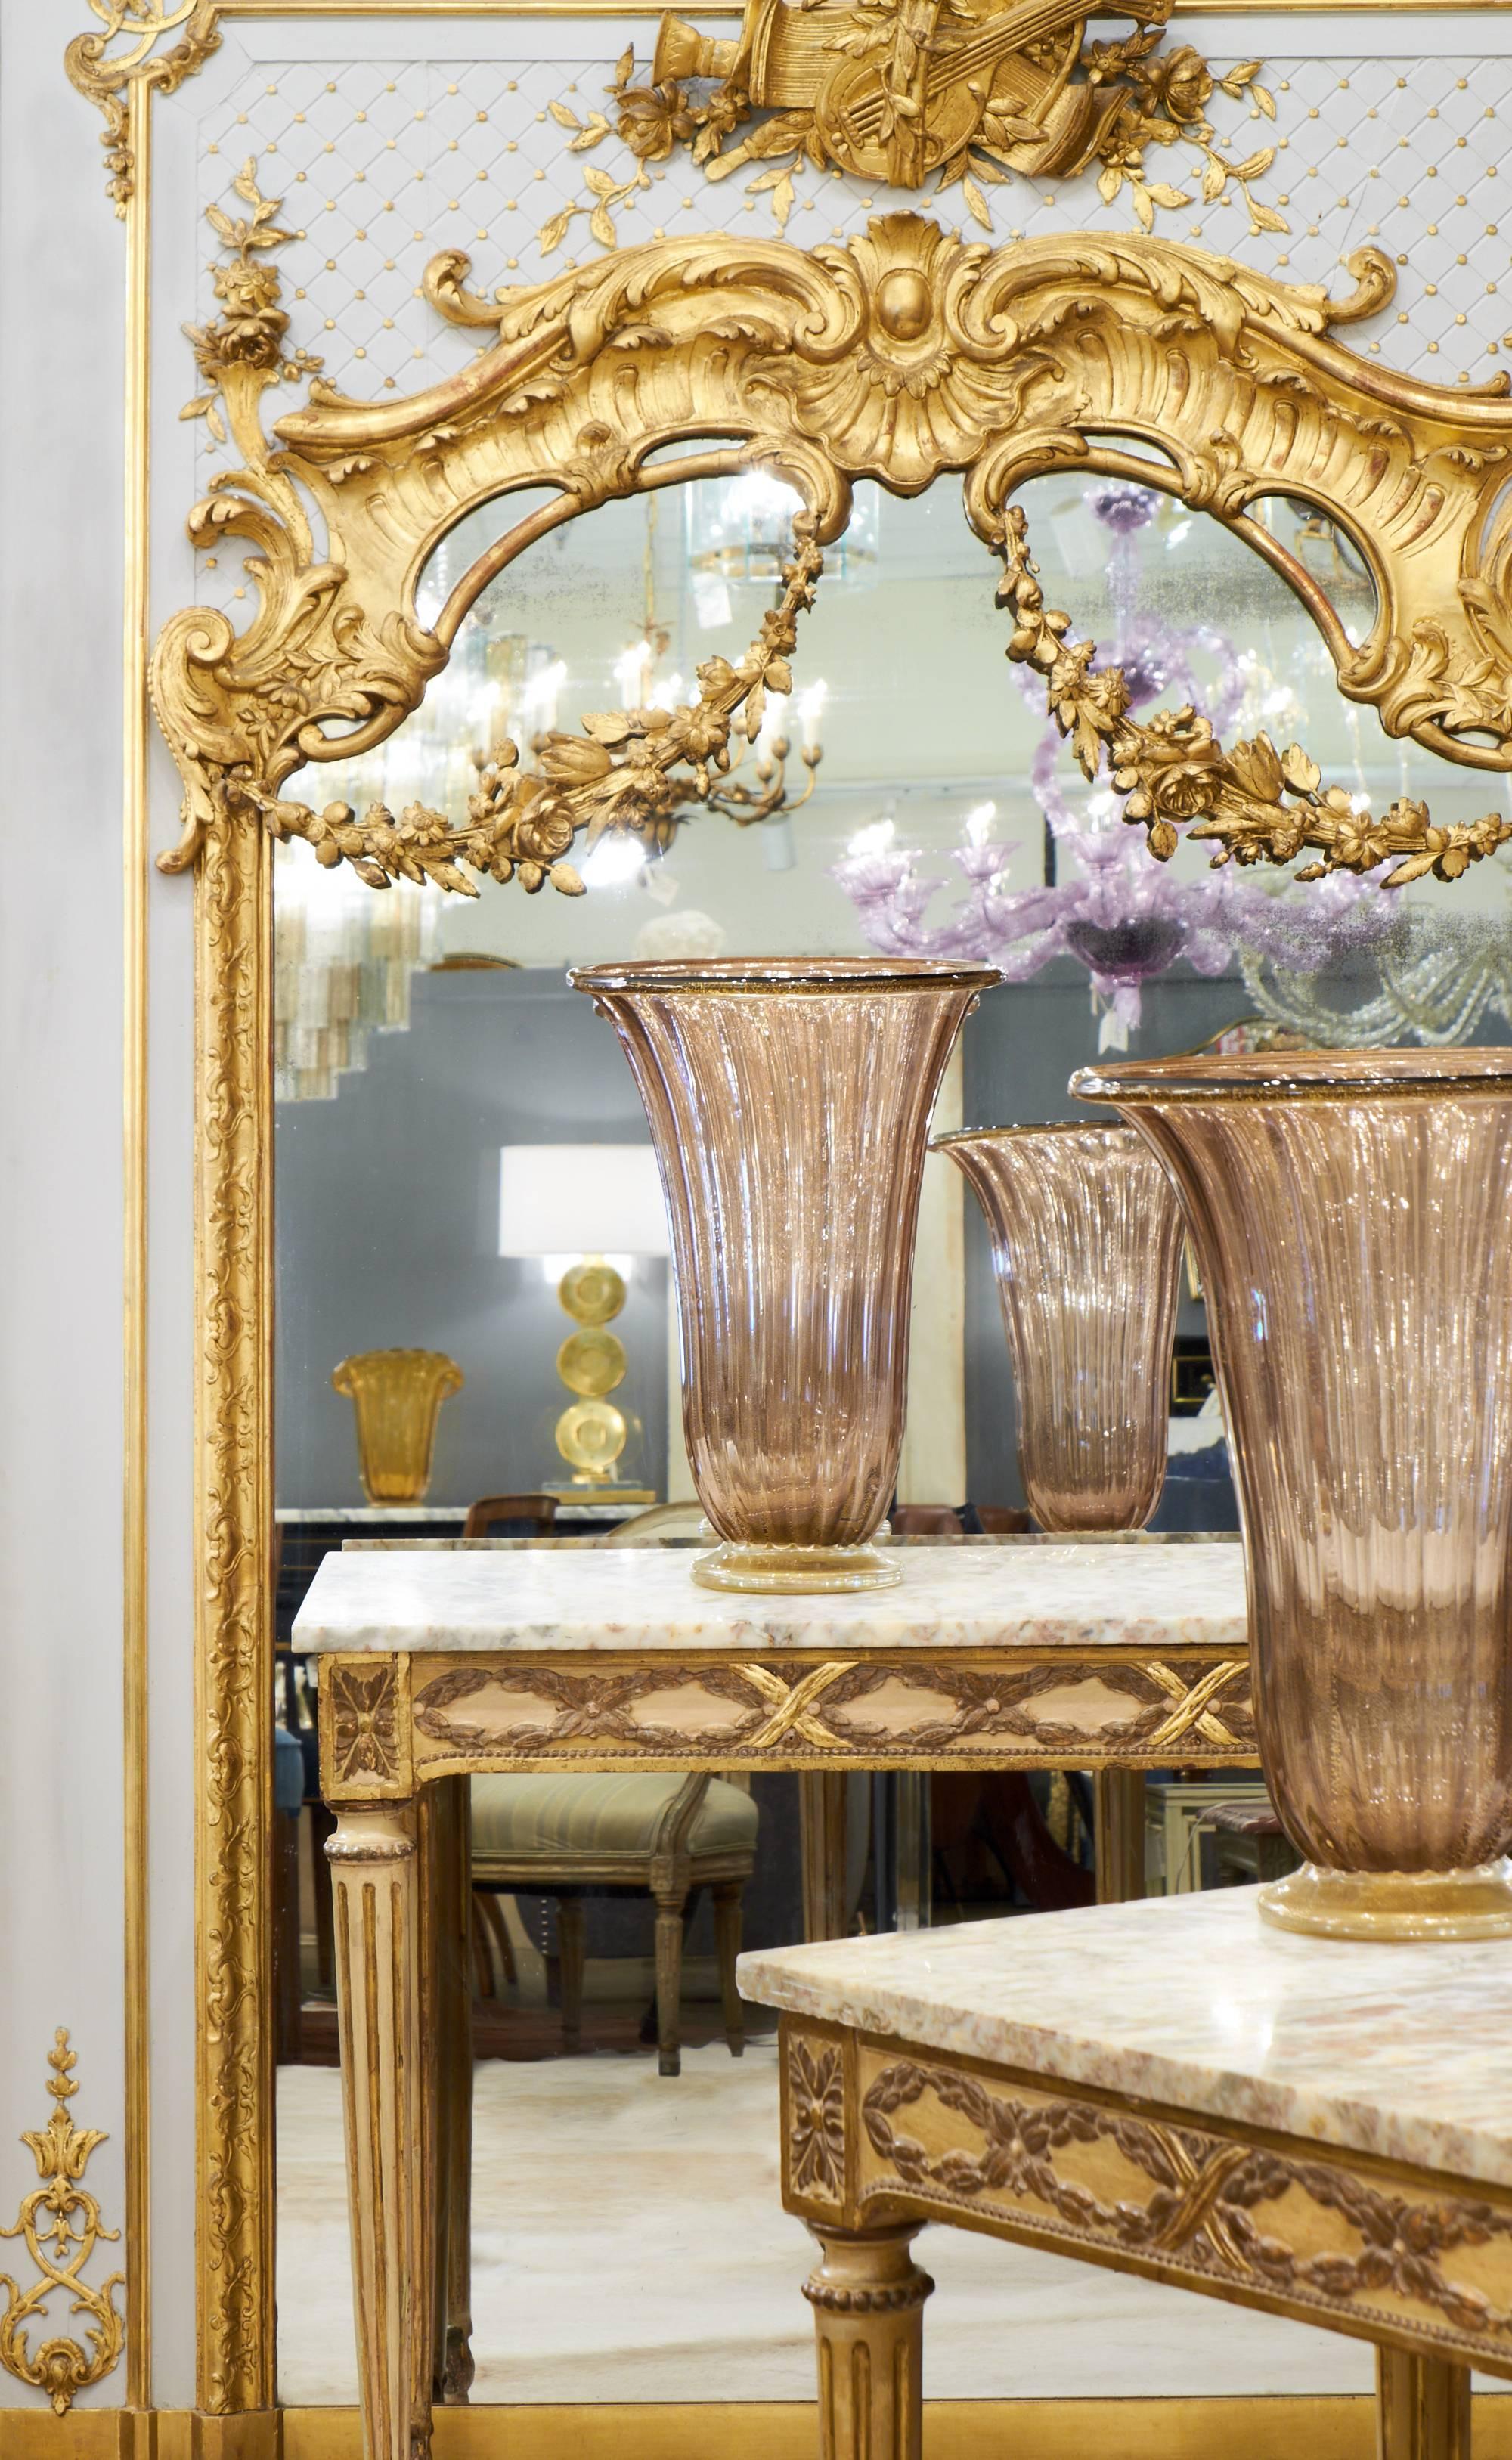 Antique Italian pair of console tables with antique Arabescato marble tops. Hand-carved laurel wreaths and ribbons decorate the aprons of these beautiful tables, which are painted and enhanced with 23-carats gold leaf in fluted, tapered legs elevate